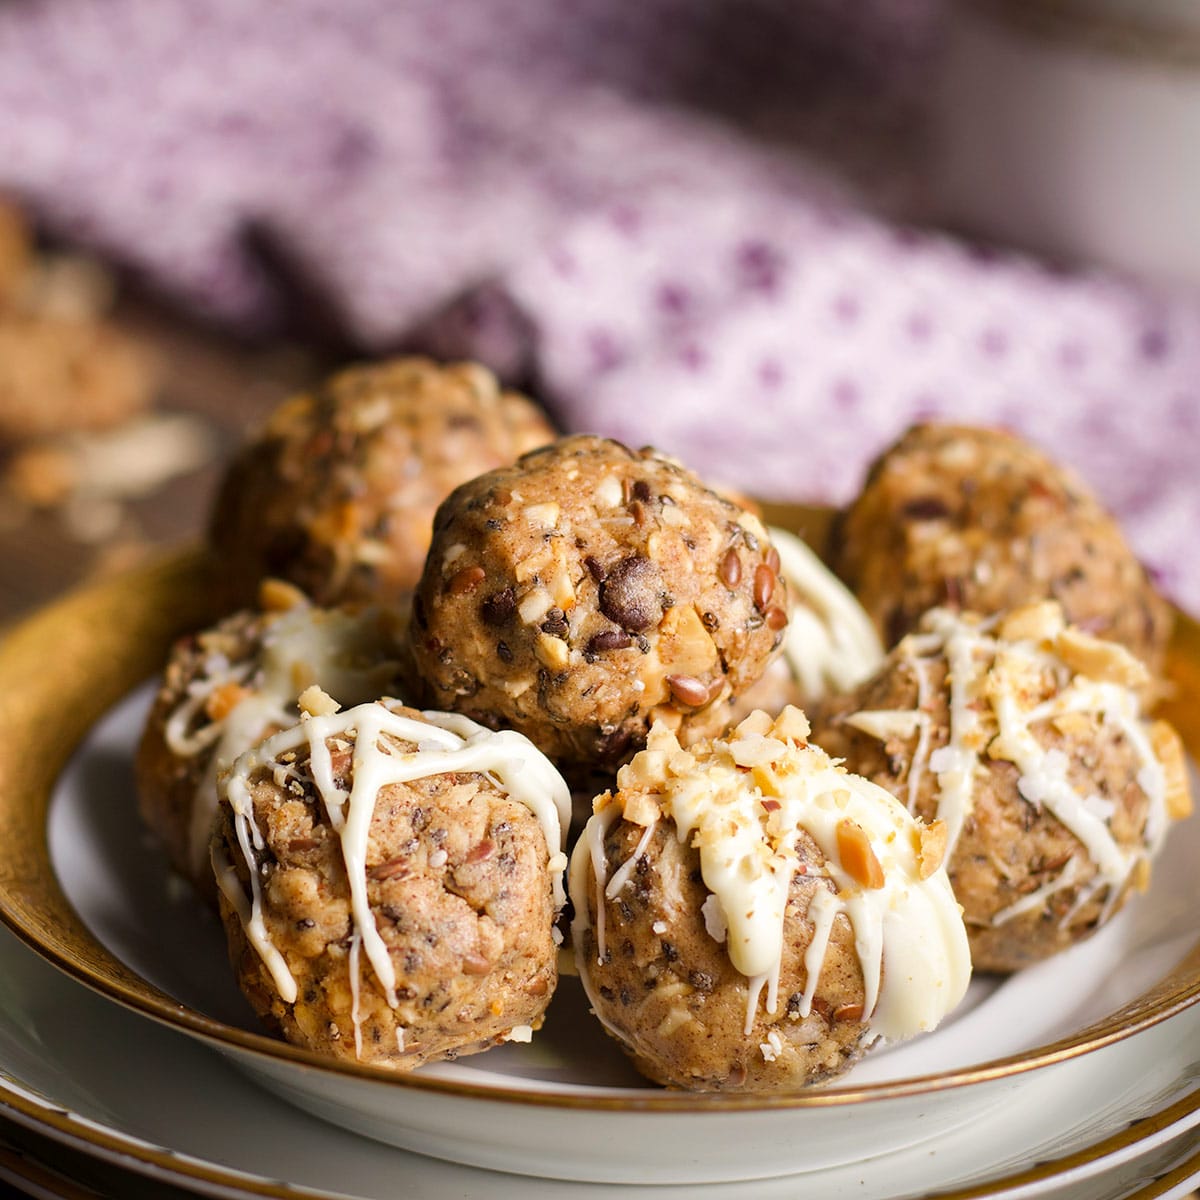 A plate of chocolate chip protein balls and white chocolate vanilla protein balls.